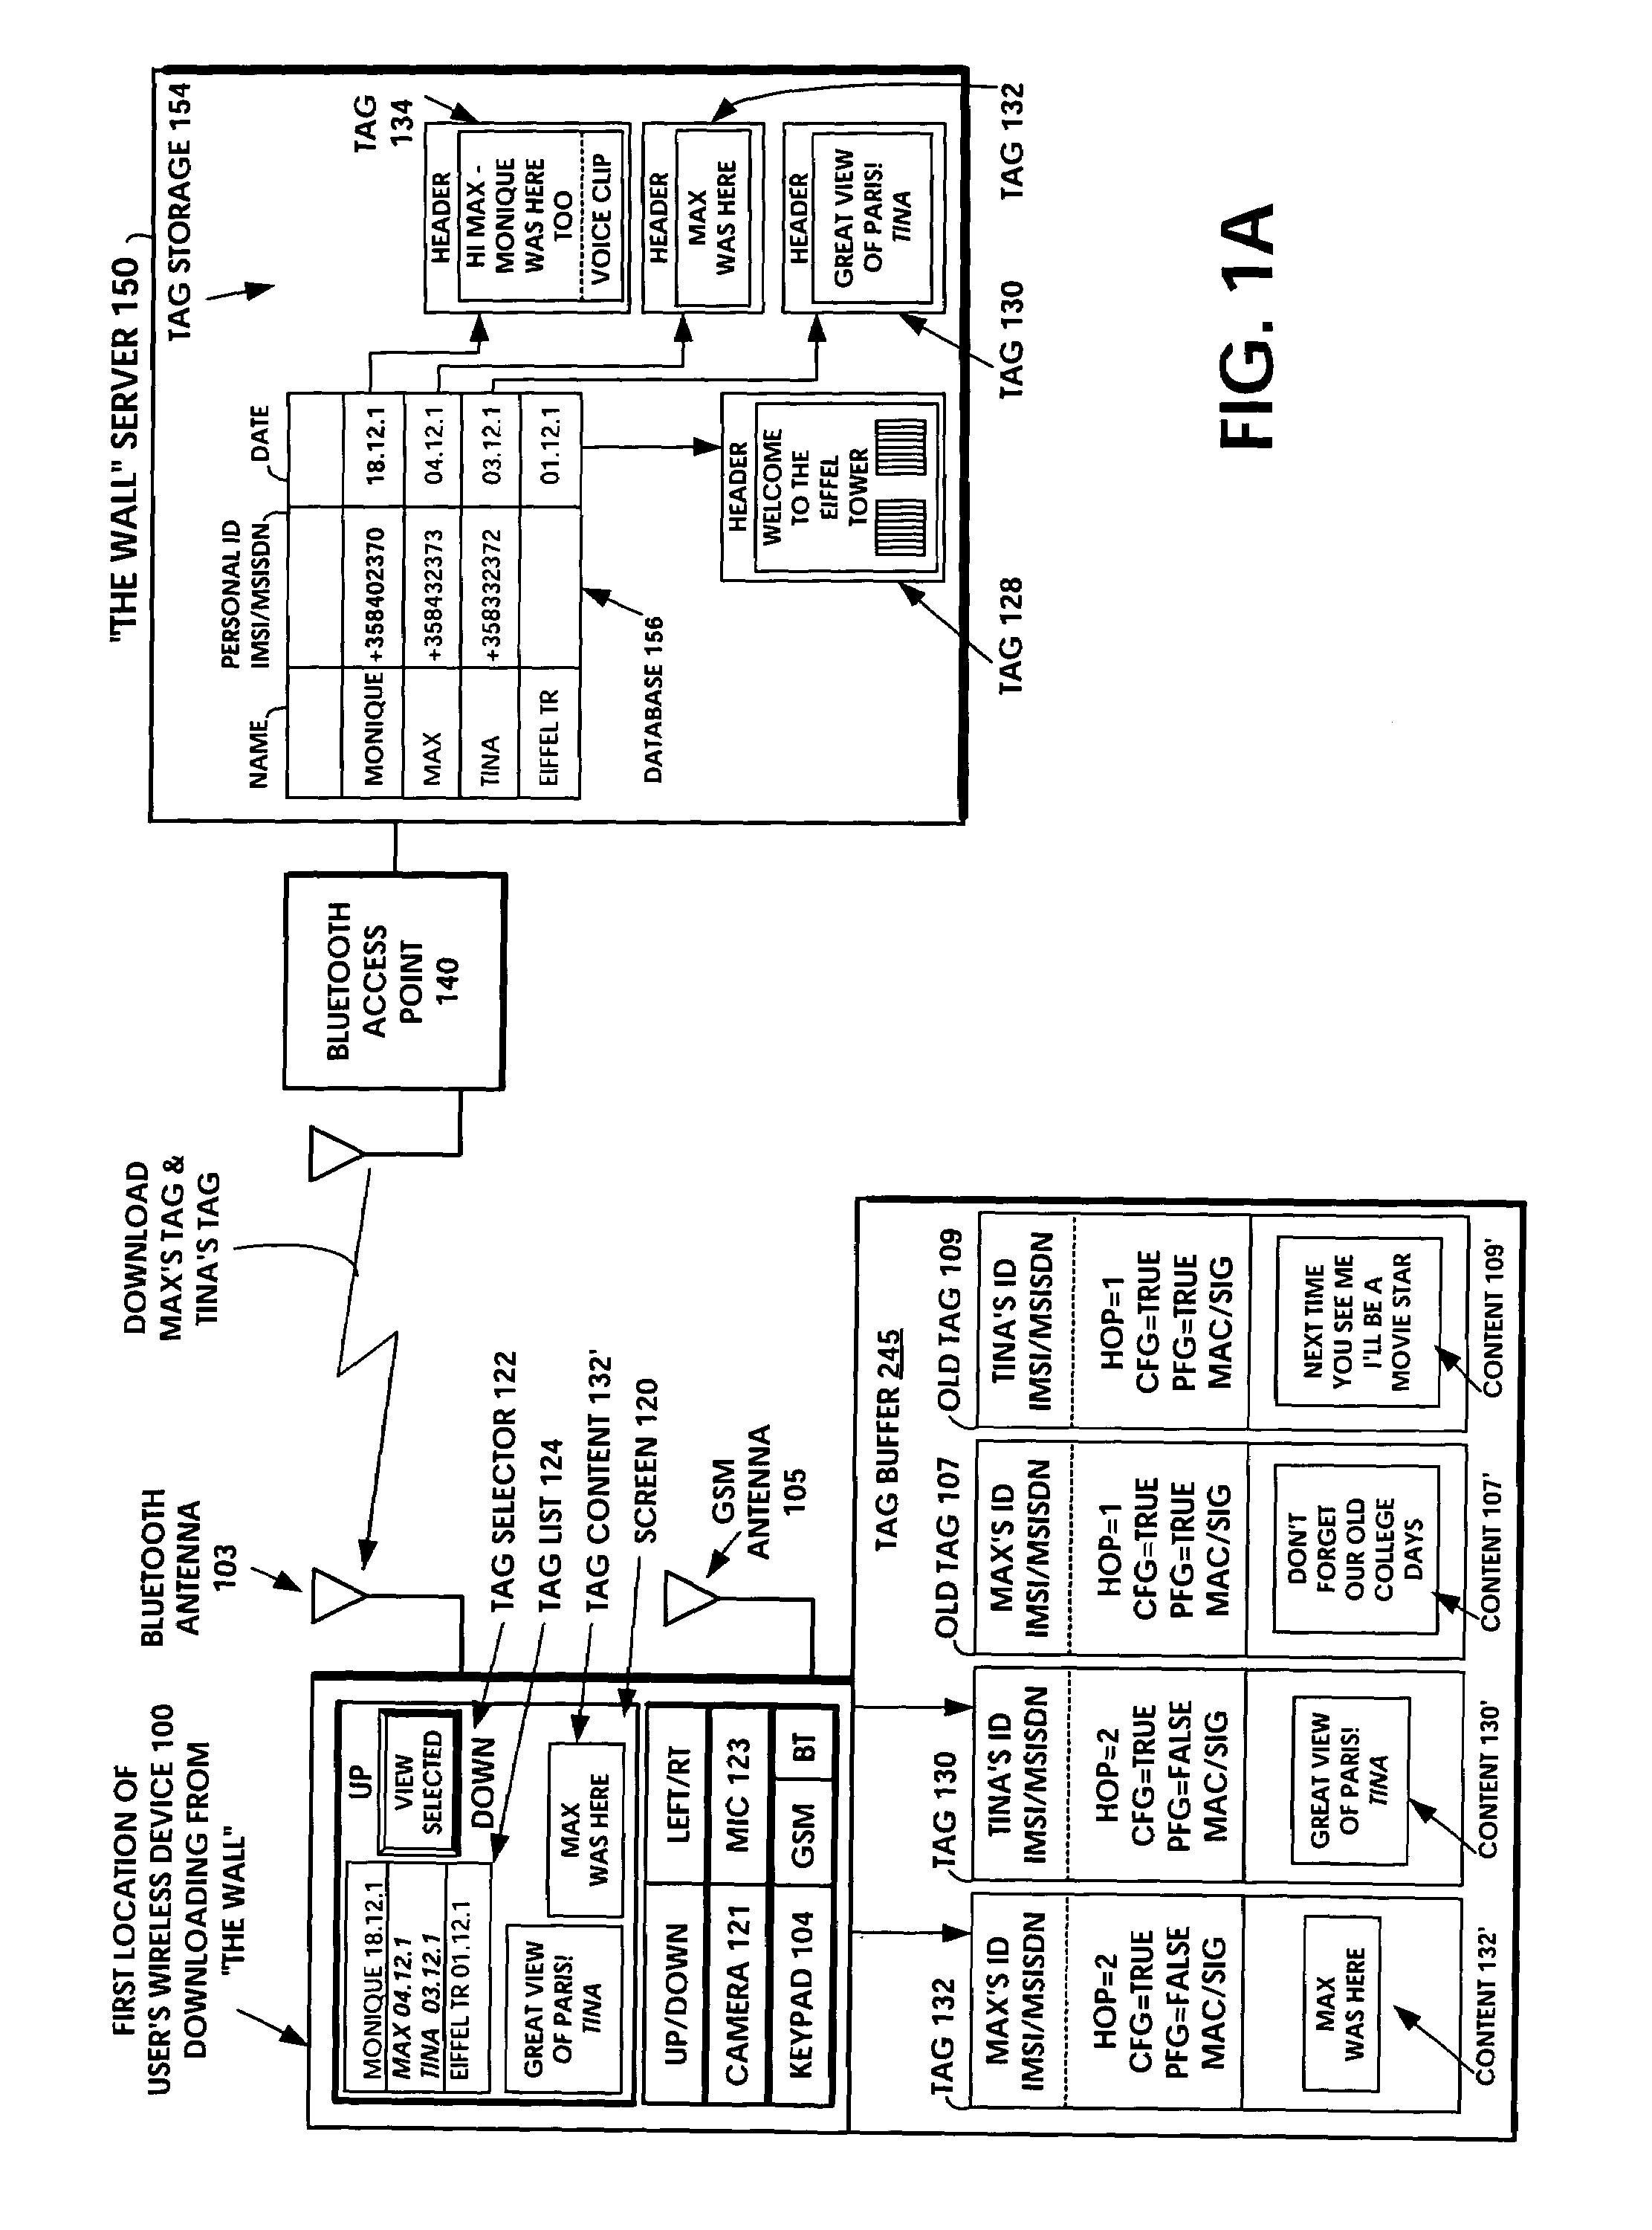 Short-range wireless system and method for multimedia tags